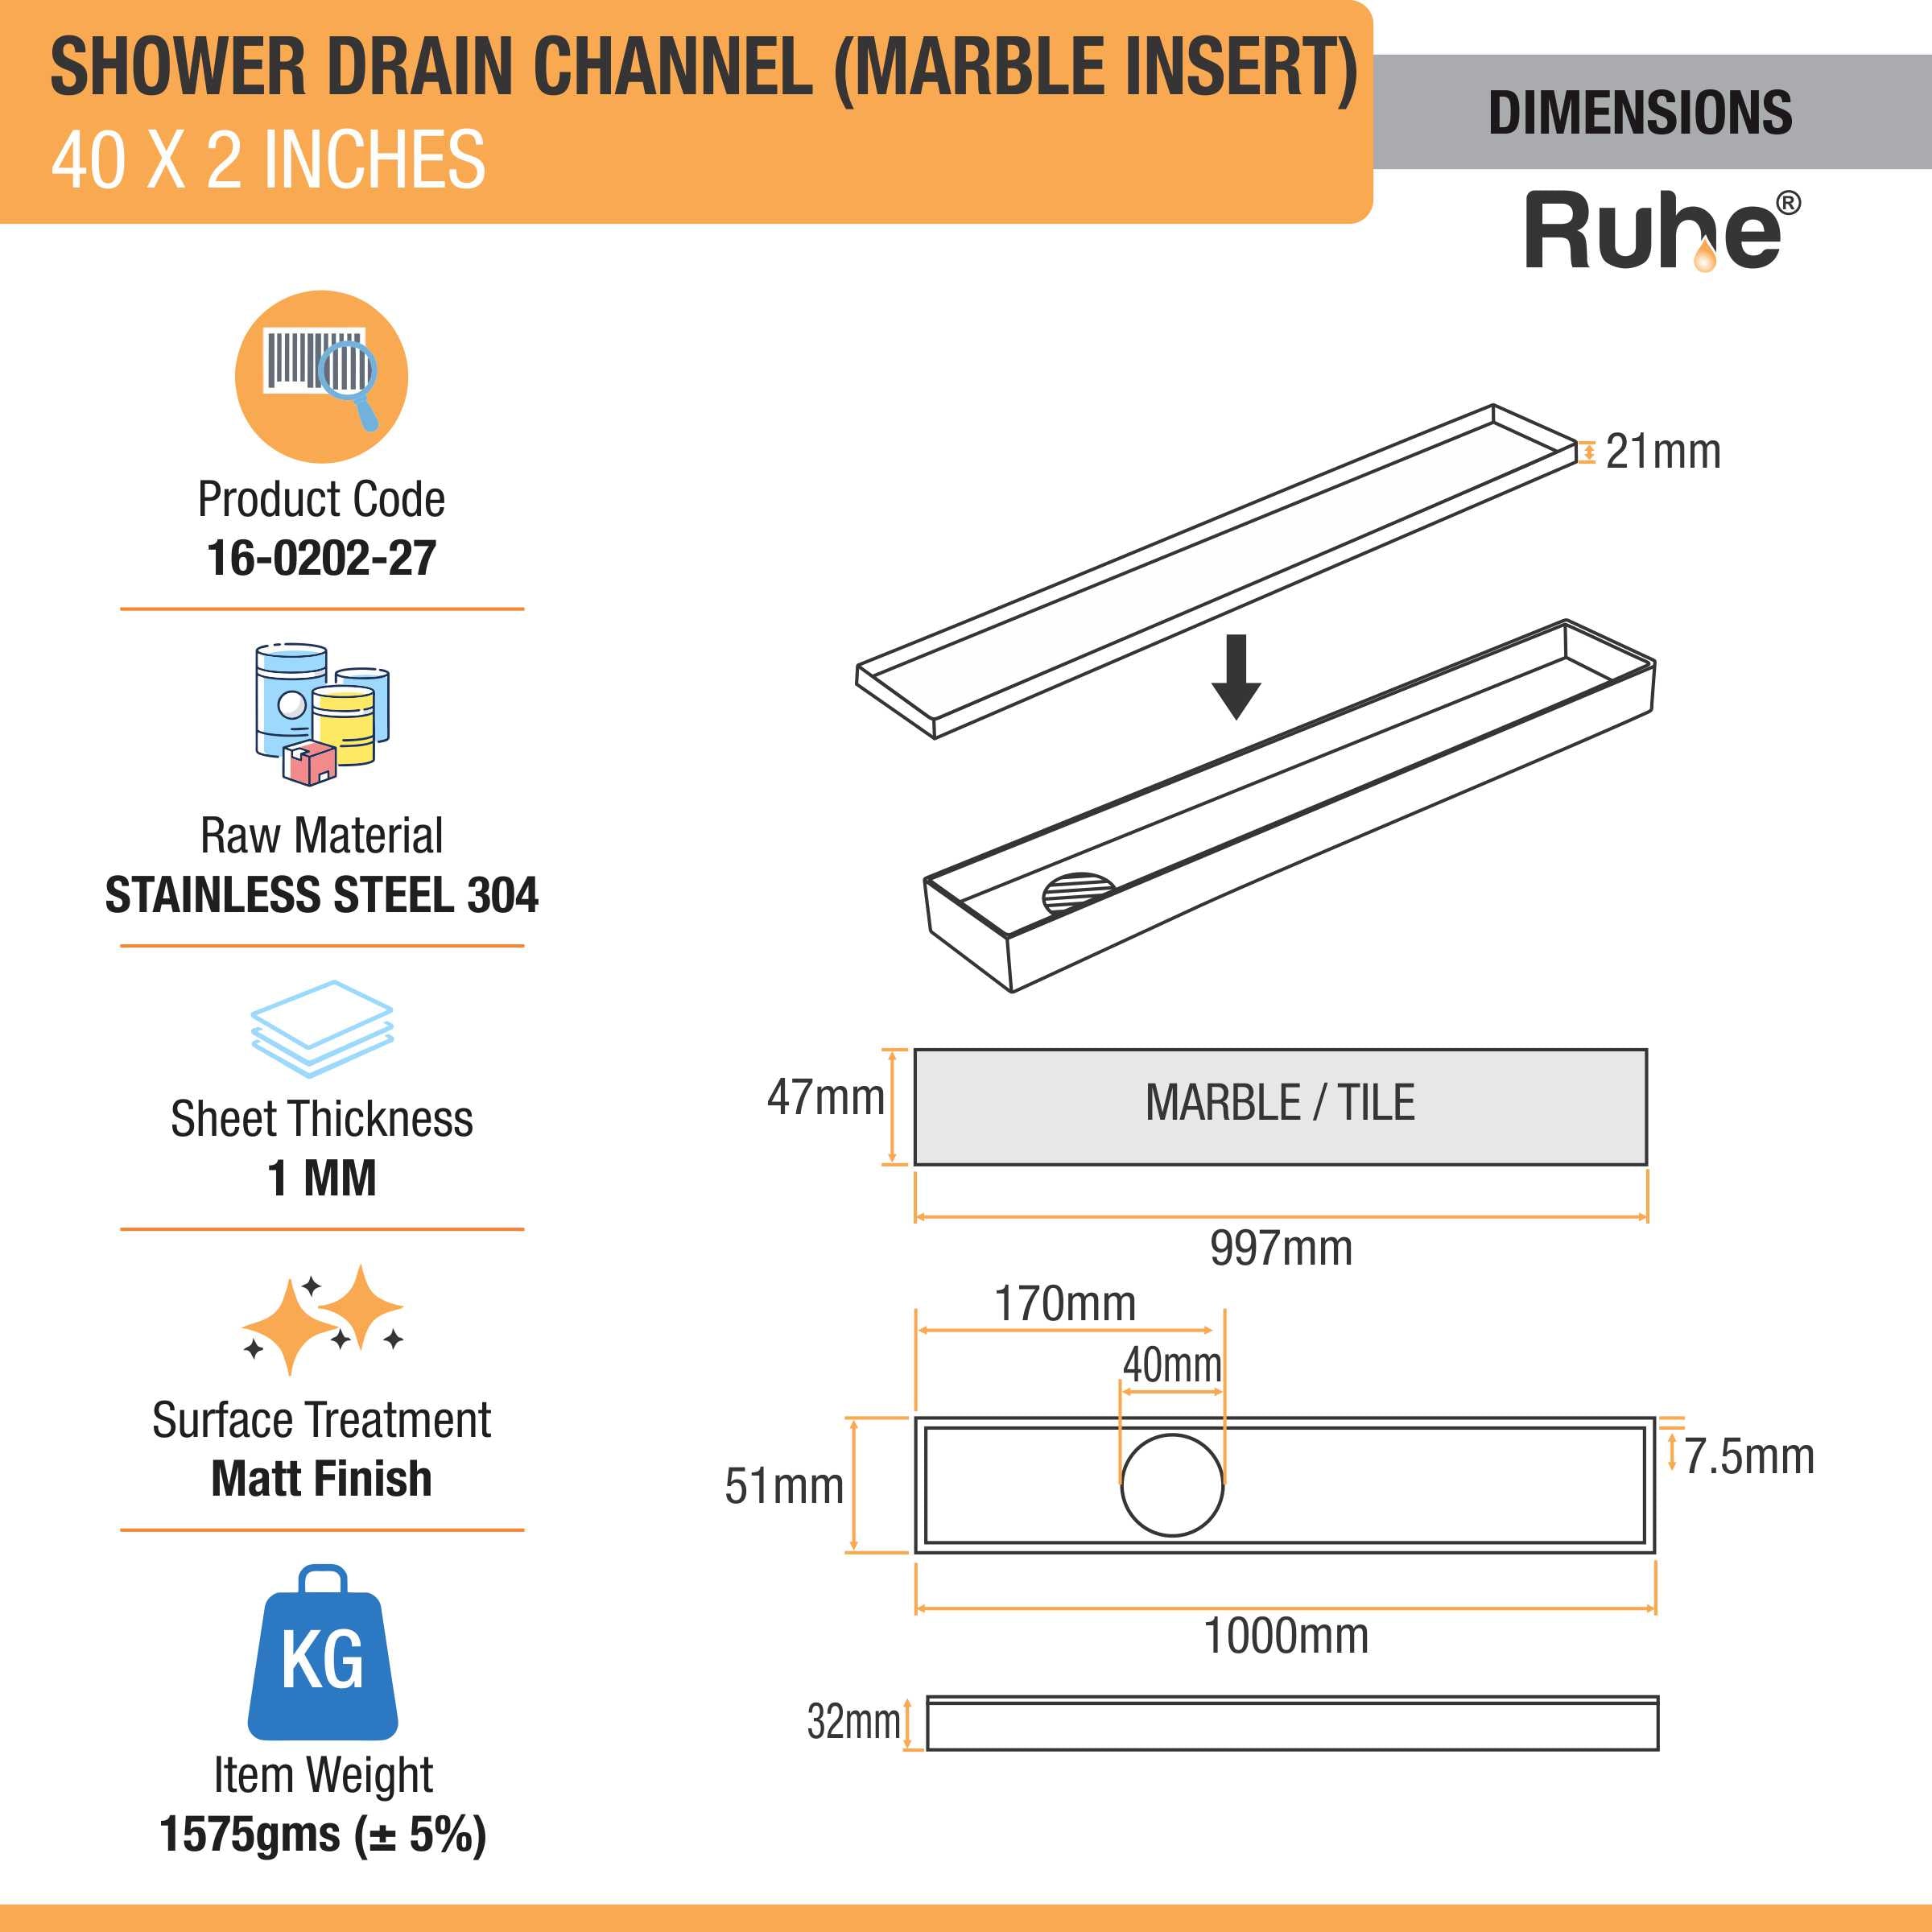 Marble Insert Shower Drain Channel (40 x 2 Inches) (304 Grade) dimensions and size